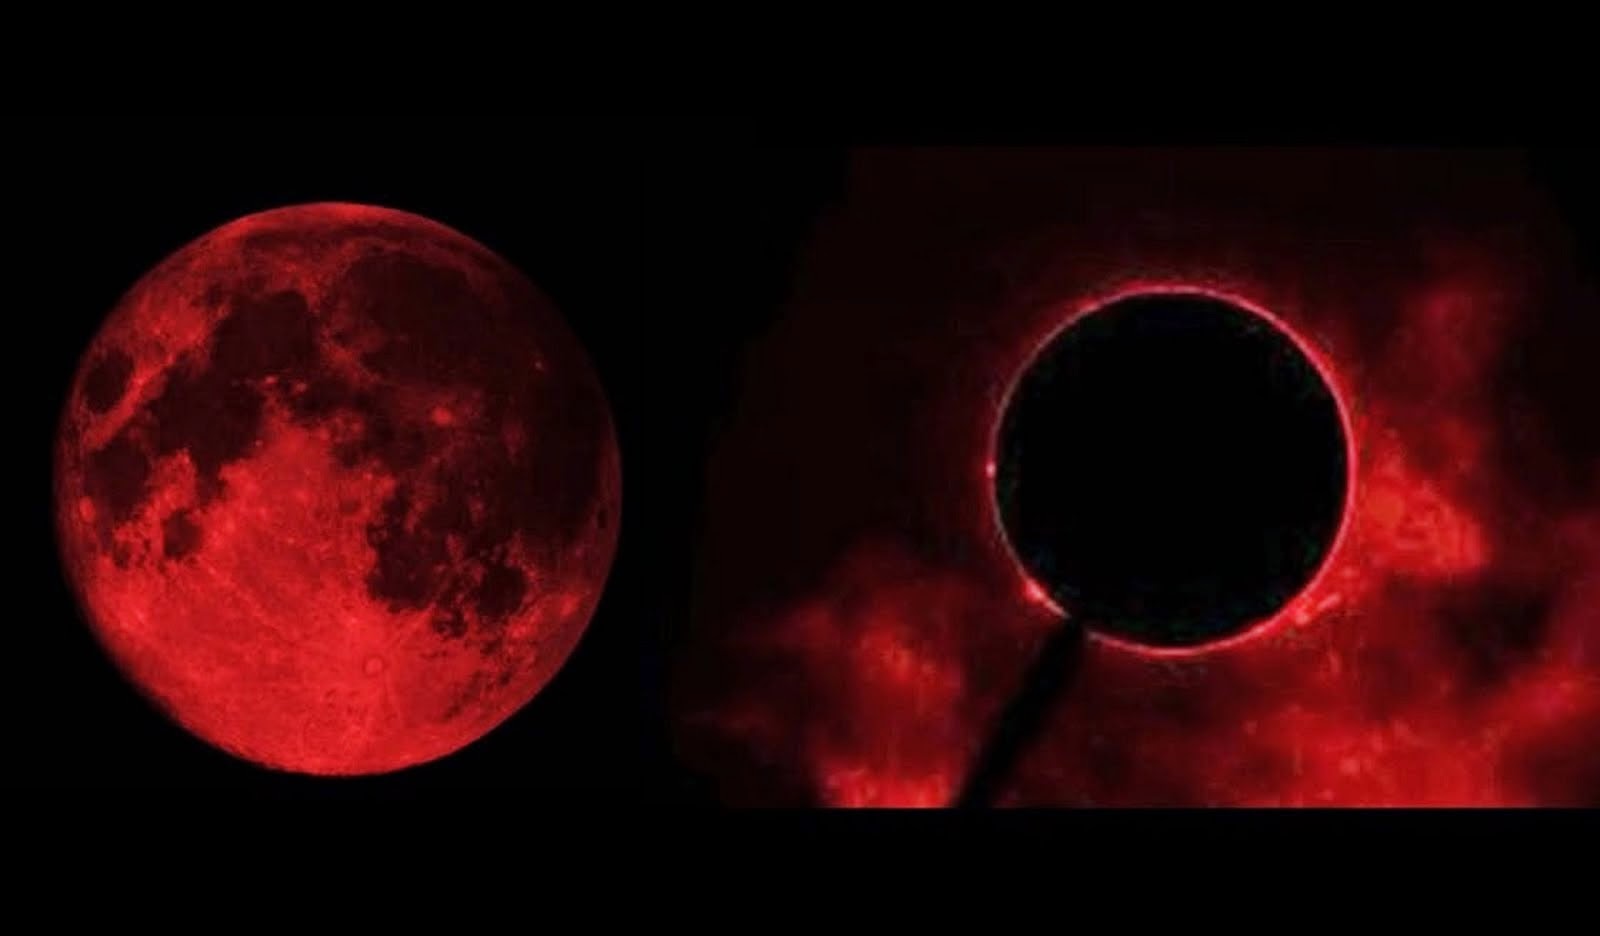 SUPER BLOOD RED MOON SOLAR ECLIPSE -"TO WATCH MY YOUTUBE VIDEO PLAYLIST PLEASE CLICK ON THE WORKIN